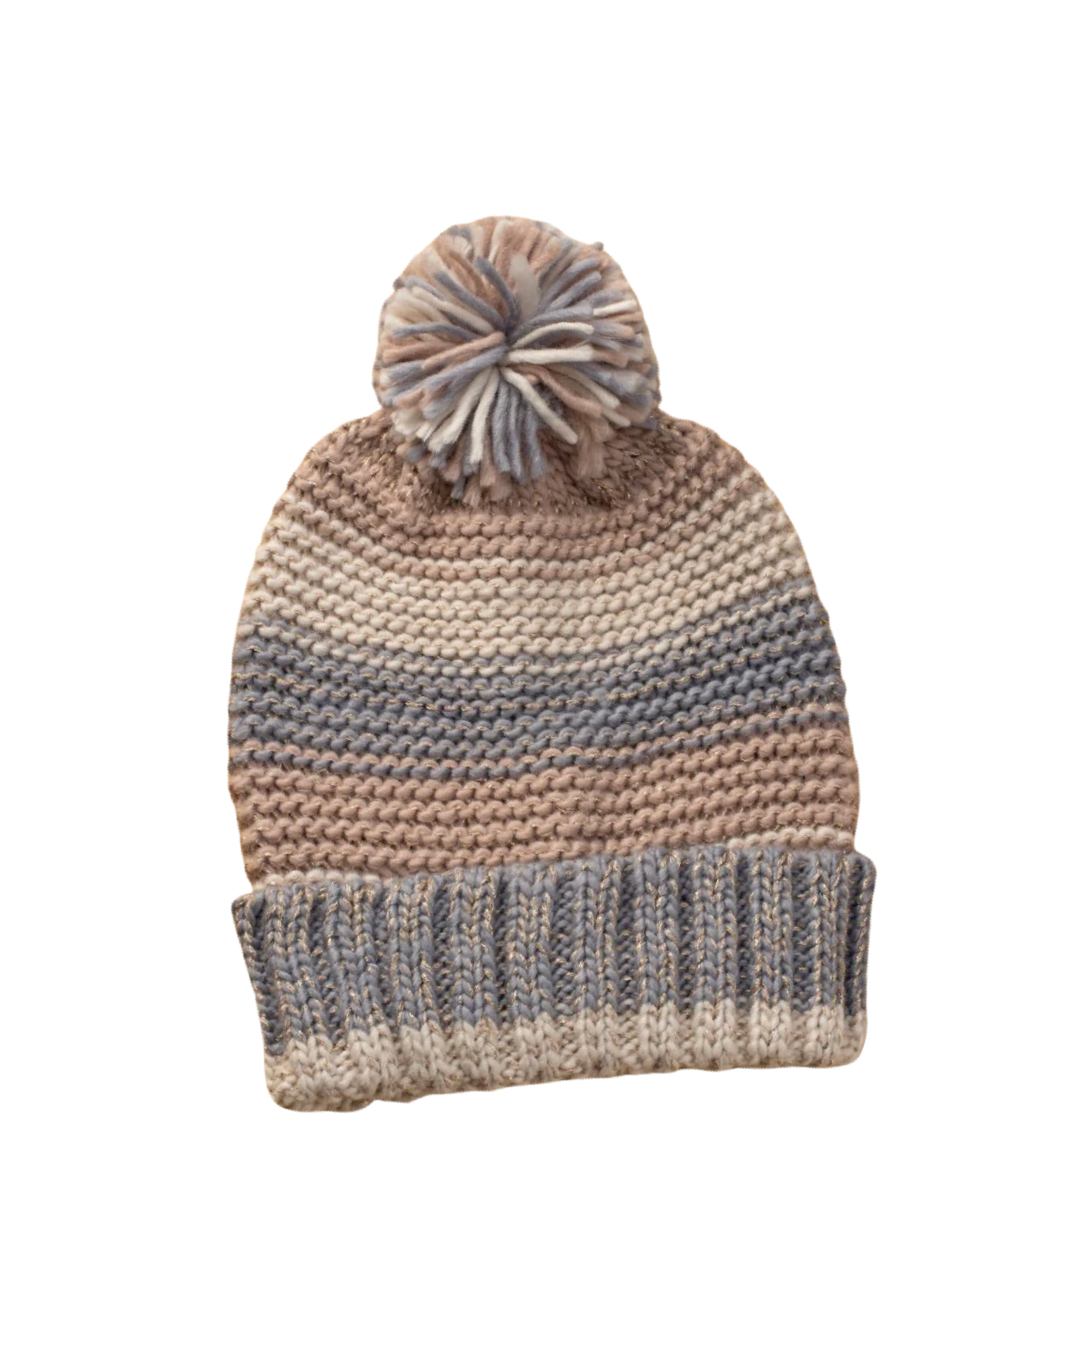 Striped Knit Pom Pom Hat in Pink and Blue